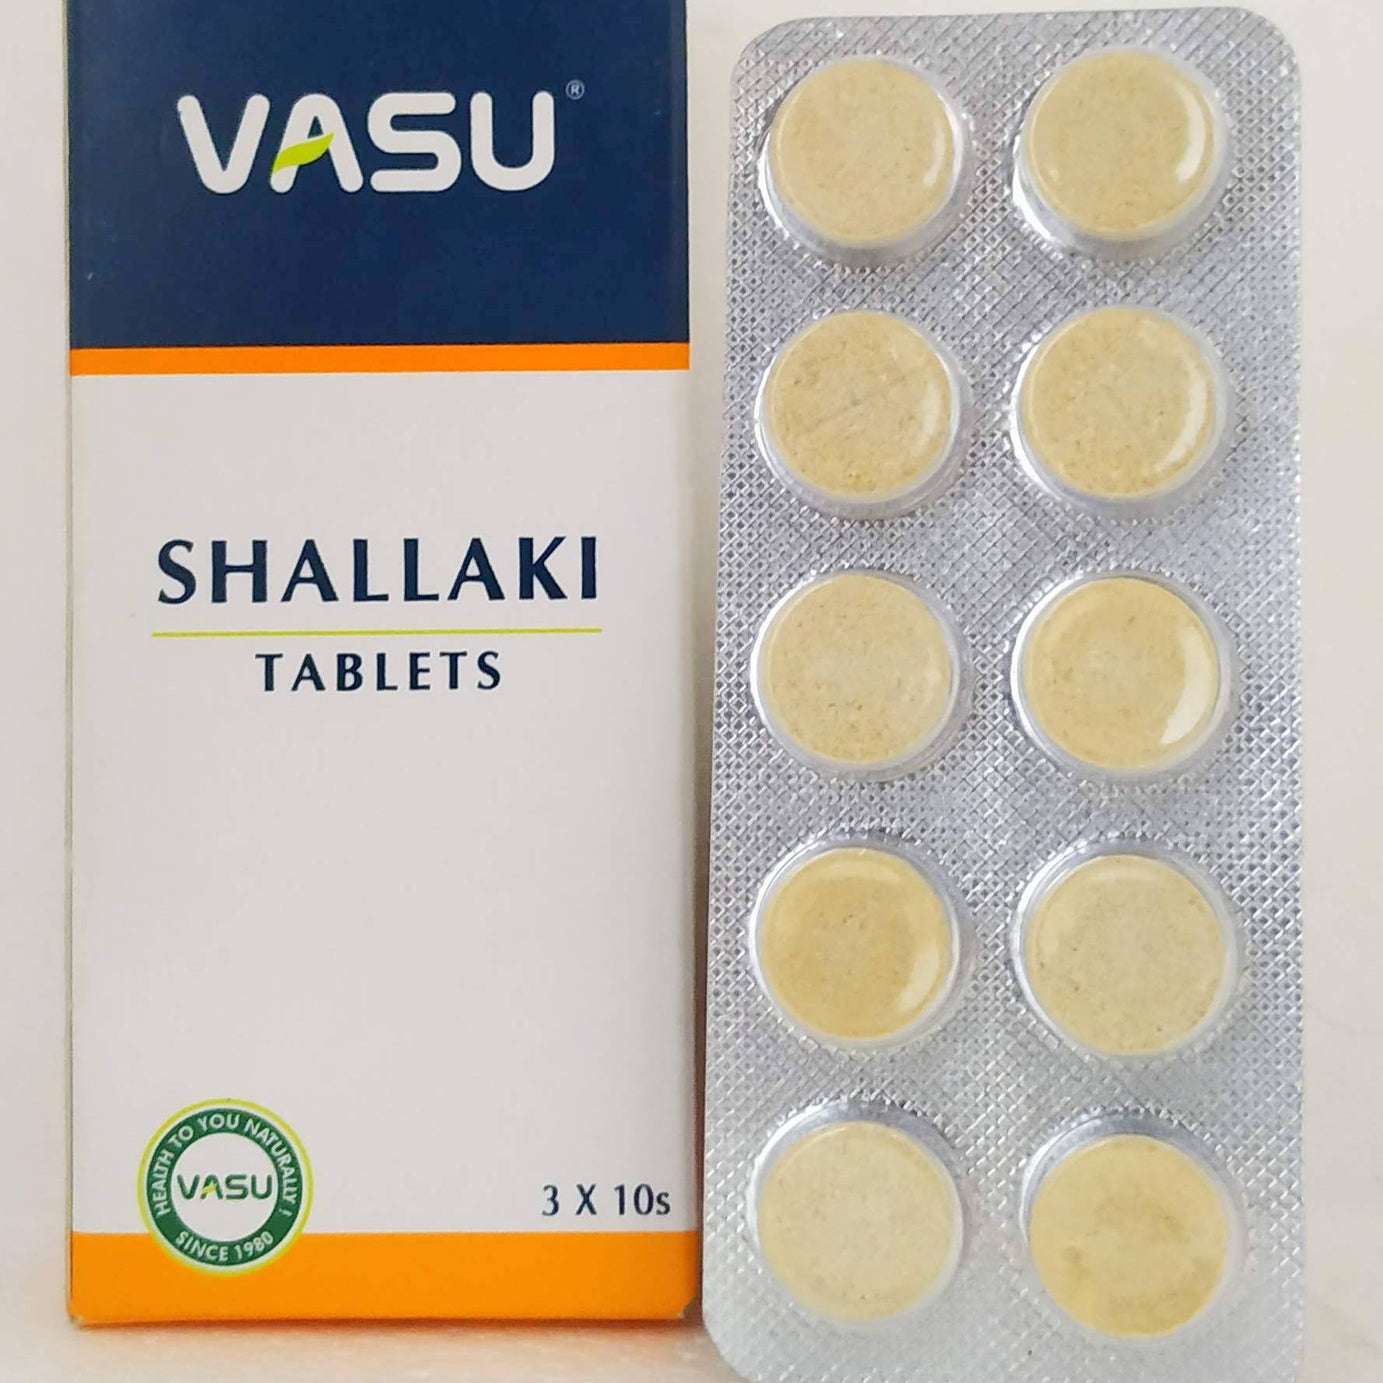 Shop Shallaki Tablets - 10Tablets at price 50.00 from Vasu herbals Online - Ayush Care